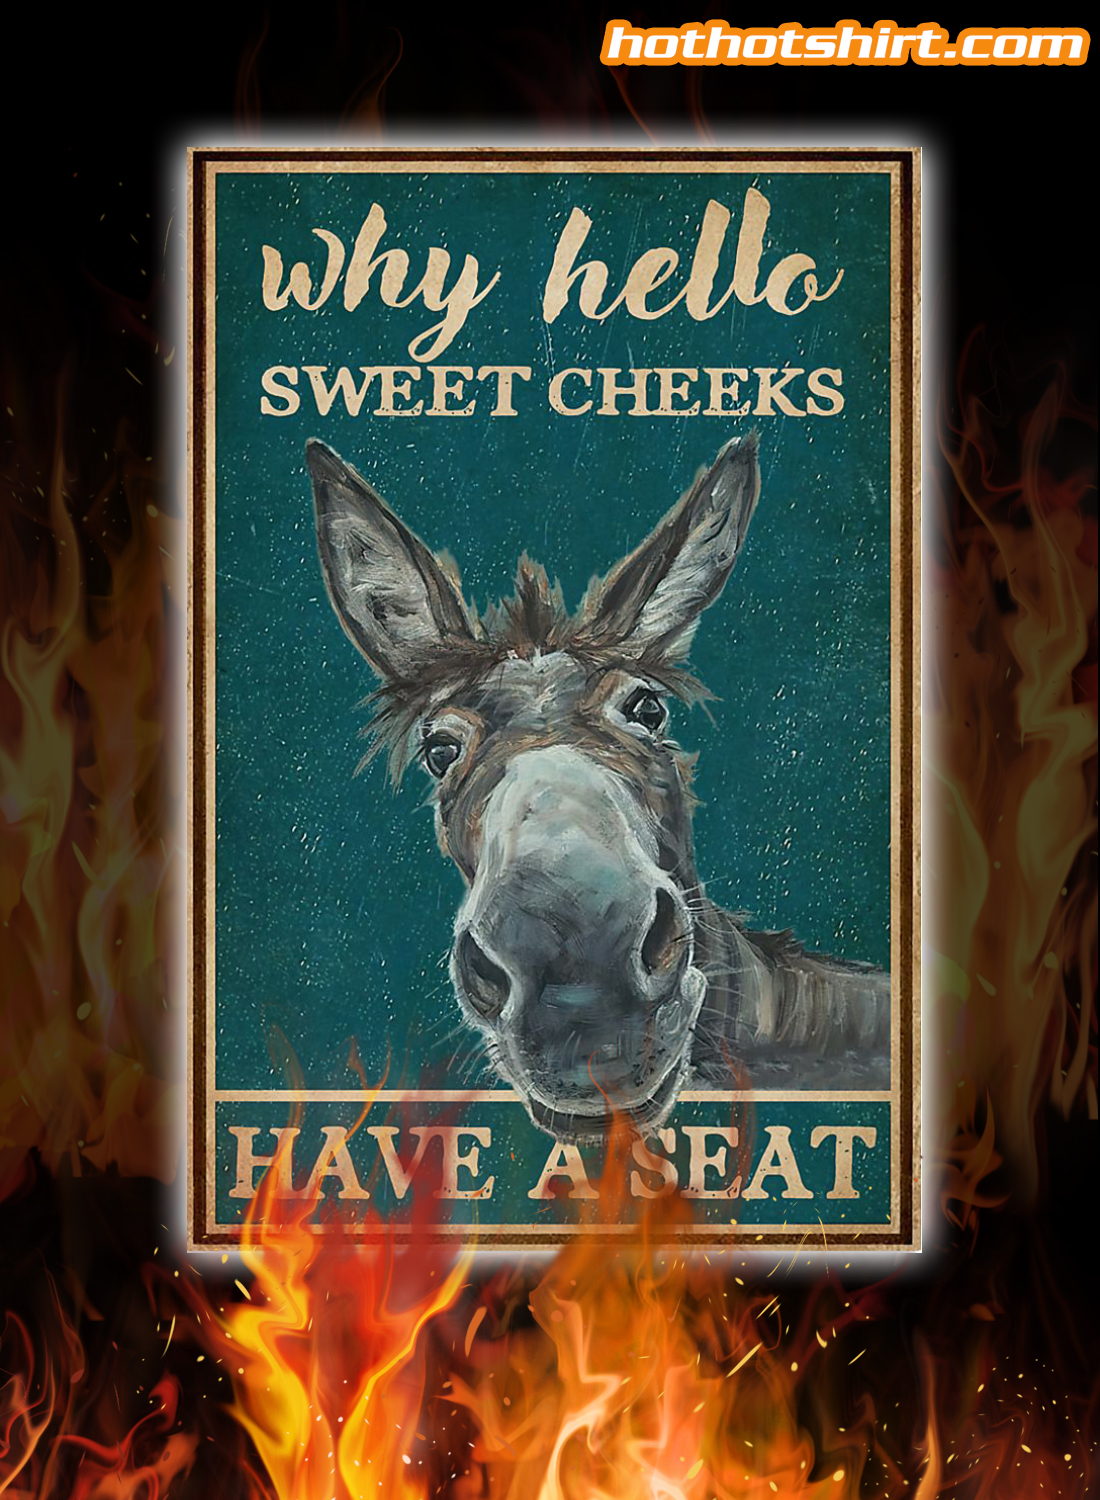 Retro Teal Donkey why hello sweet cheeks have a seat poster